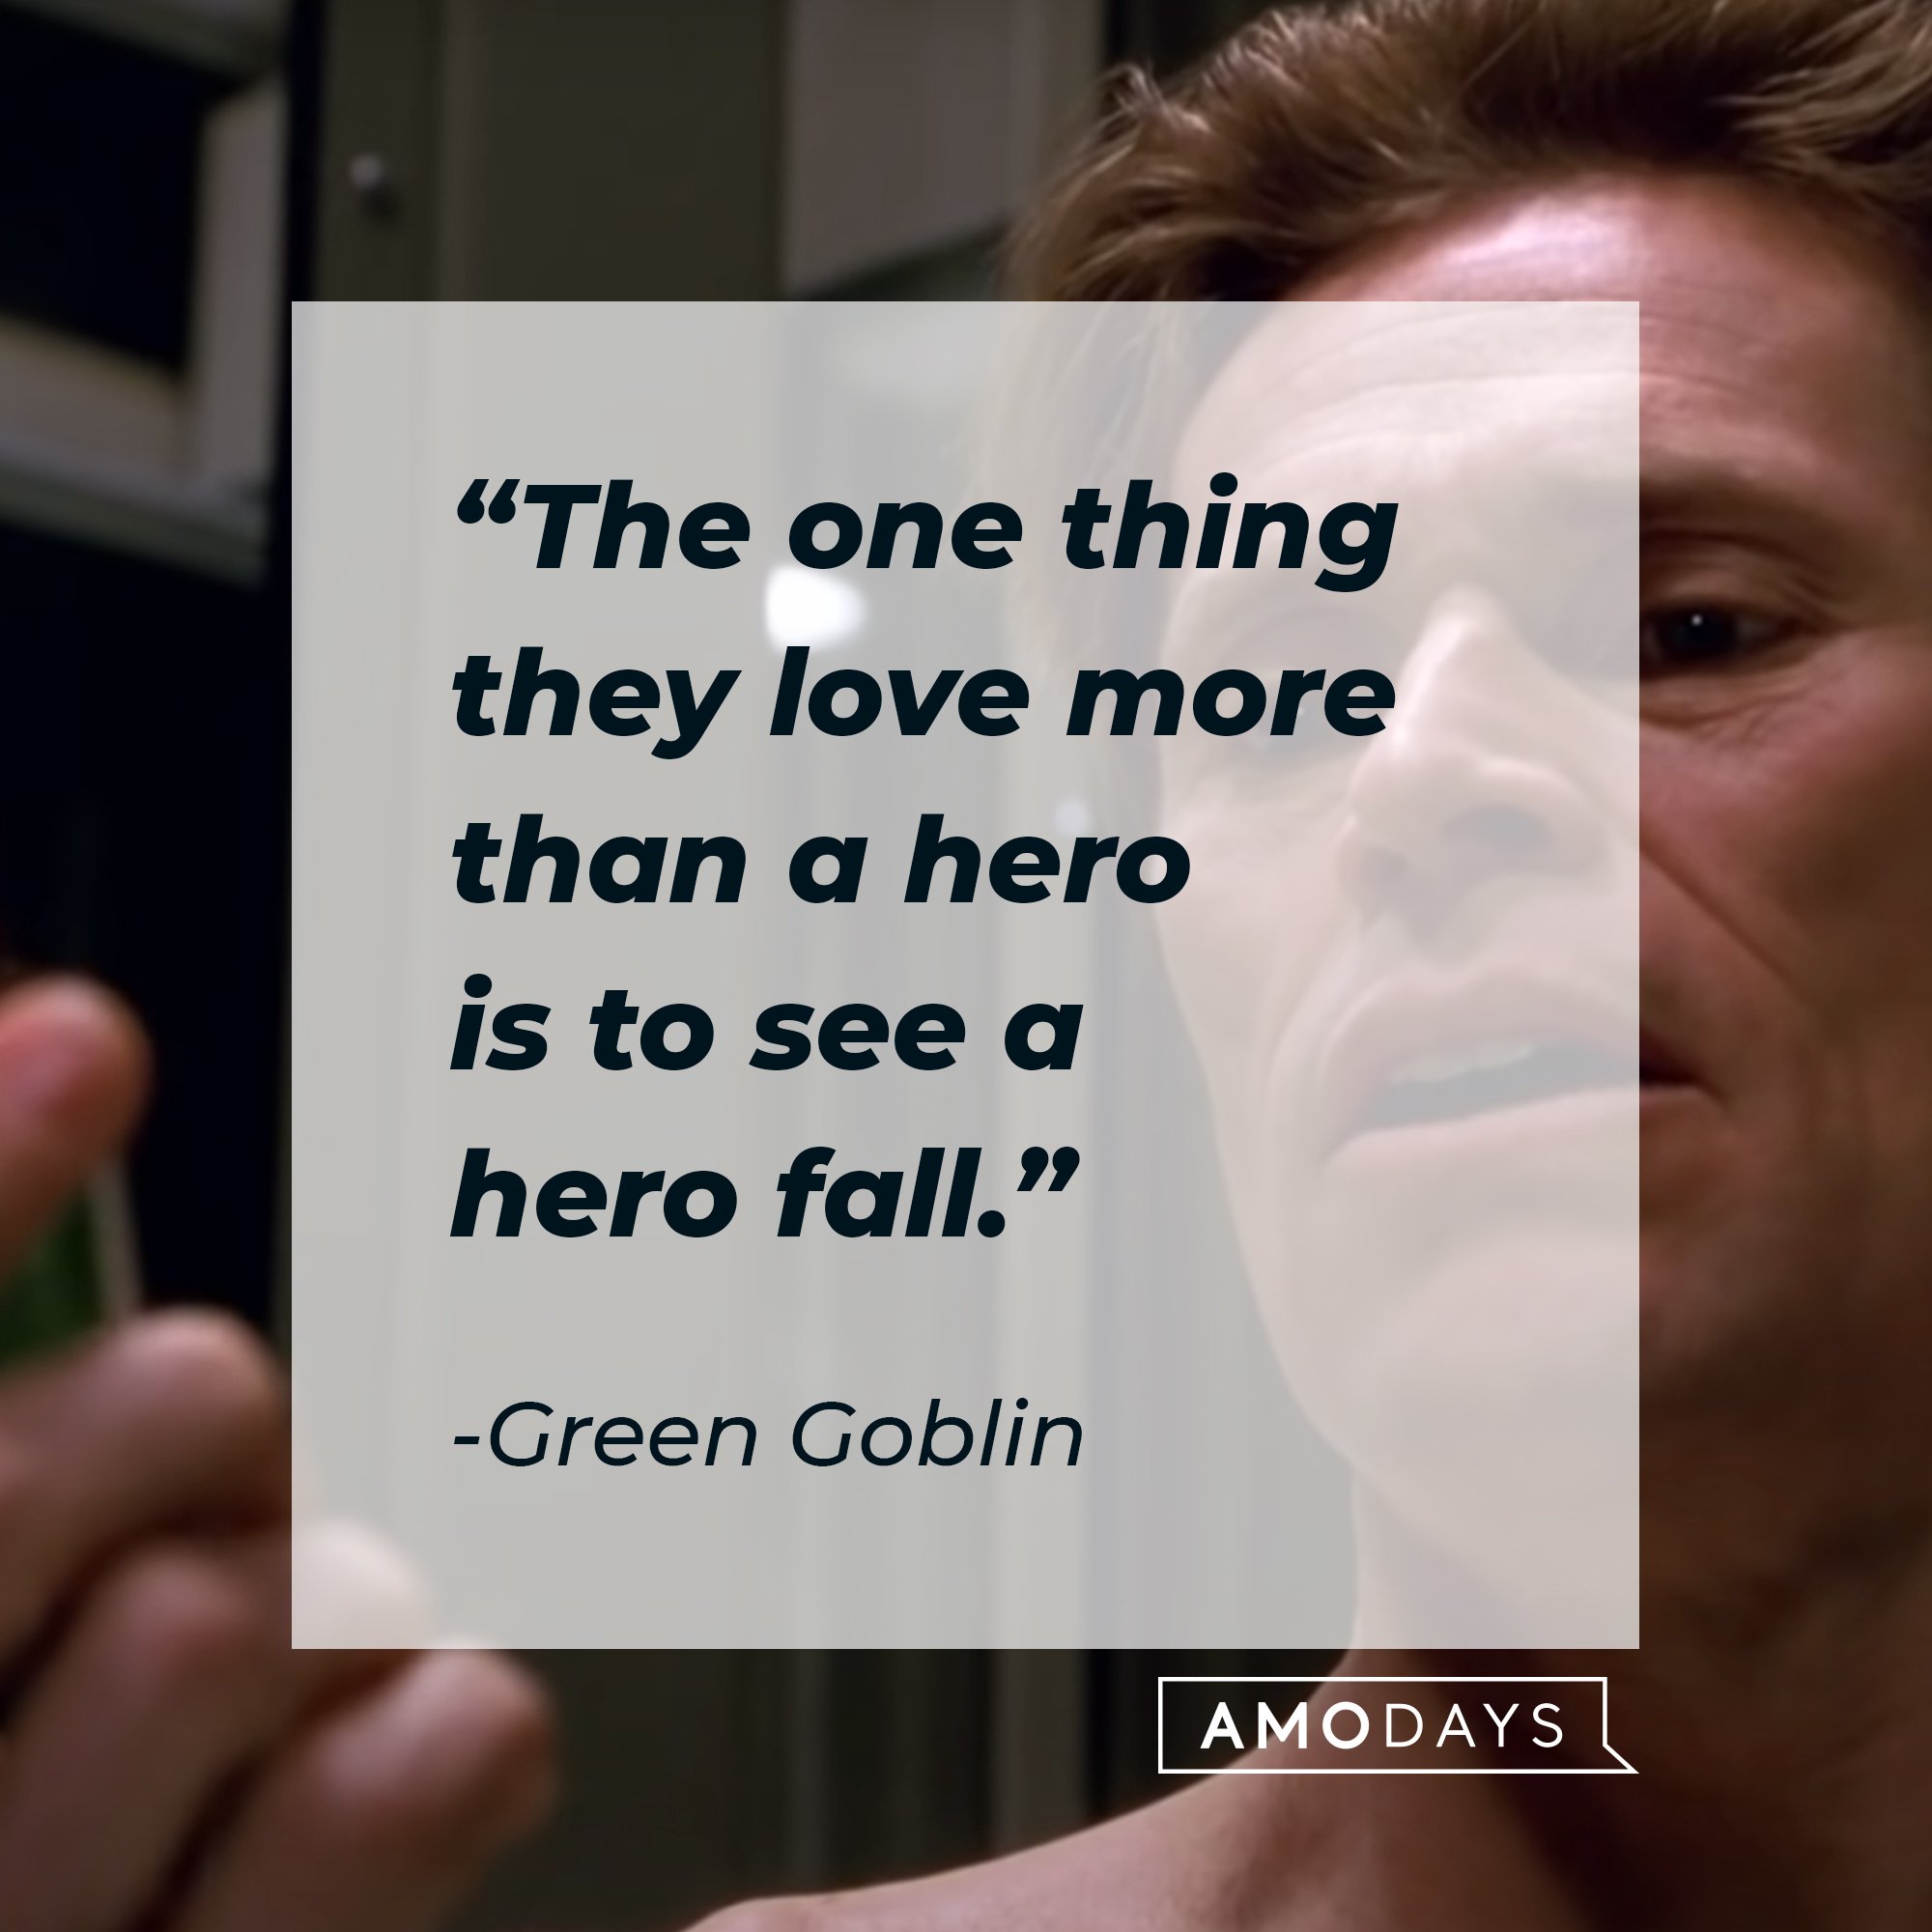 Green Goblin’s quote: “The one thing they love more than a hero is to see a hero fall.” | Image: AmoDays